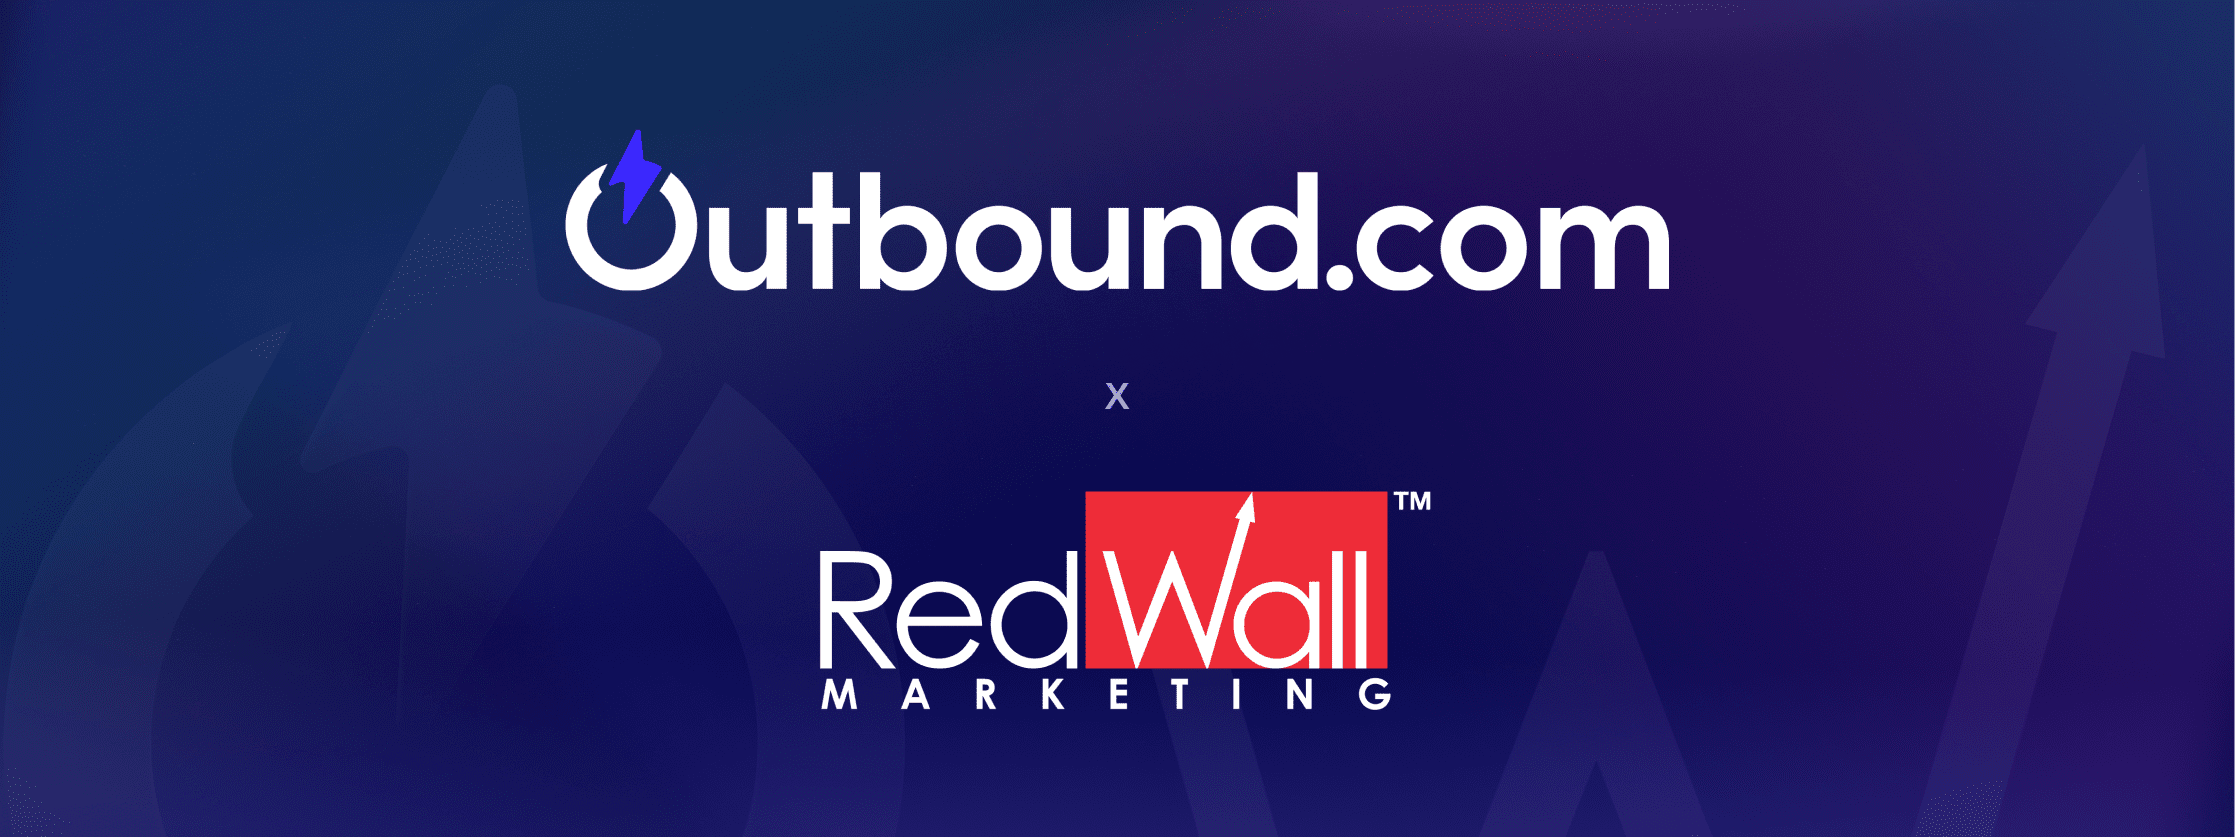 Red Wall Marketing & Outbound Graphic